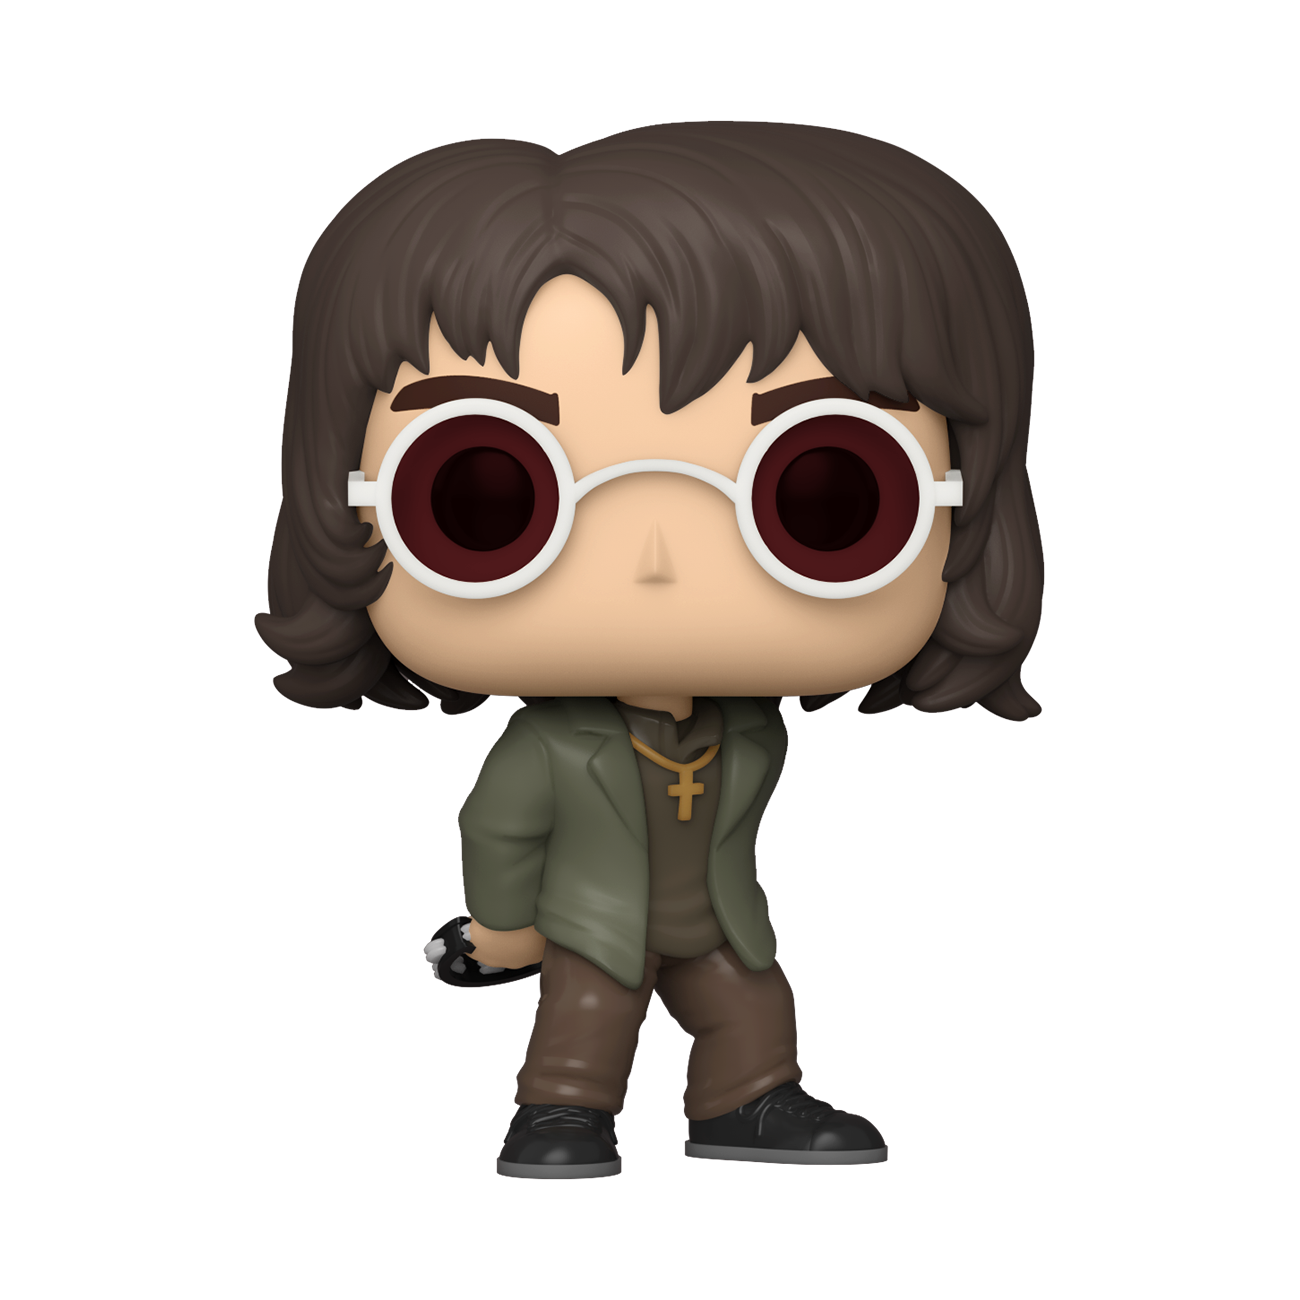 Photos - Action Figures / Transformers Funko POP! Liam Gallagher - Oasis 